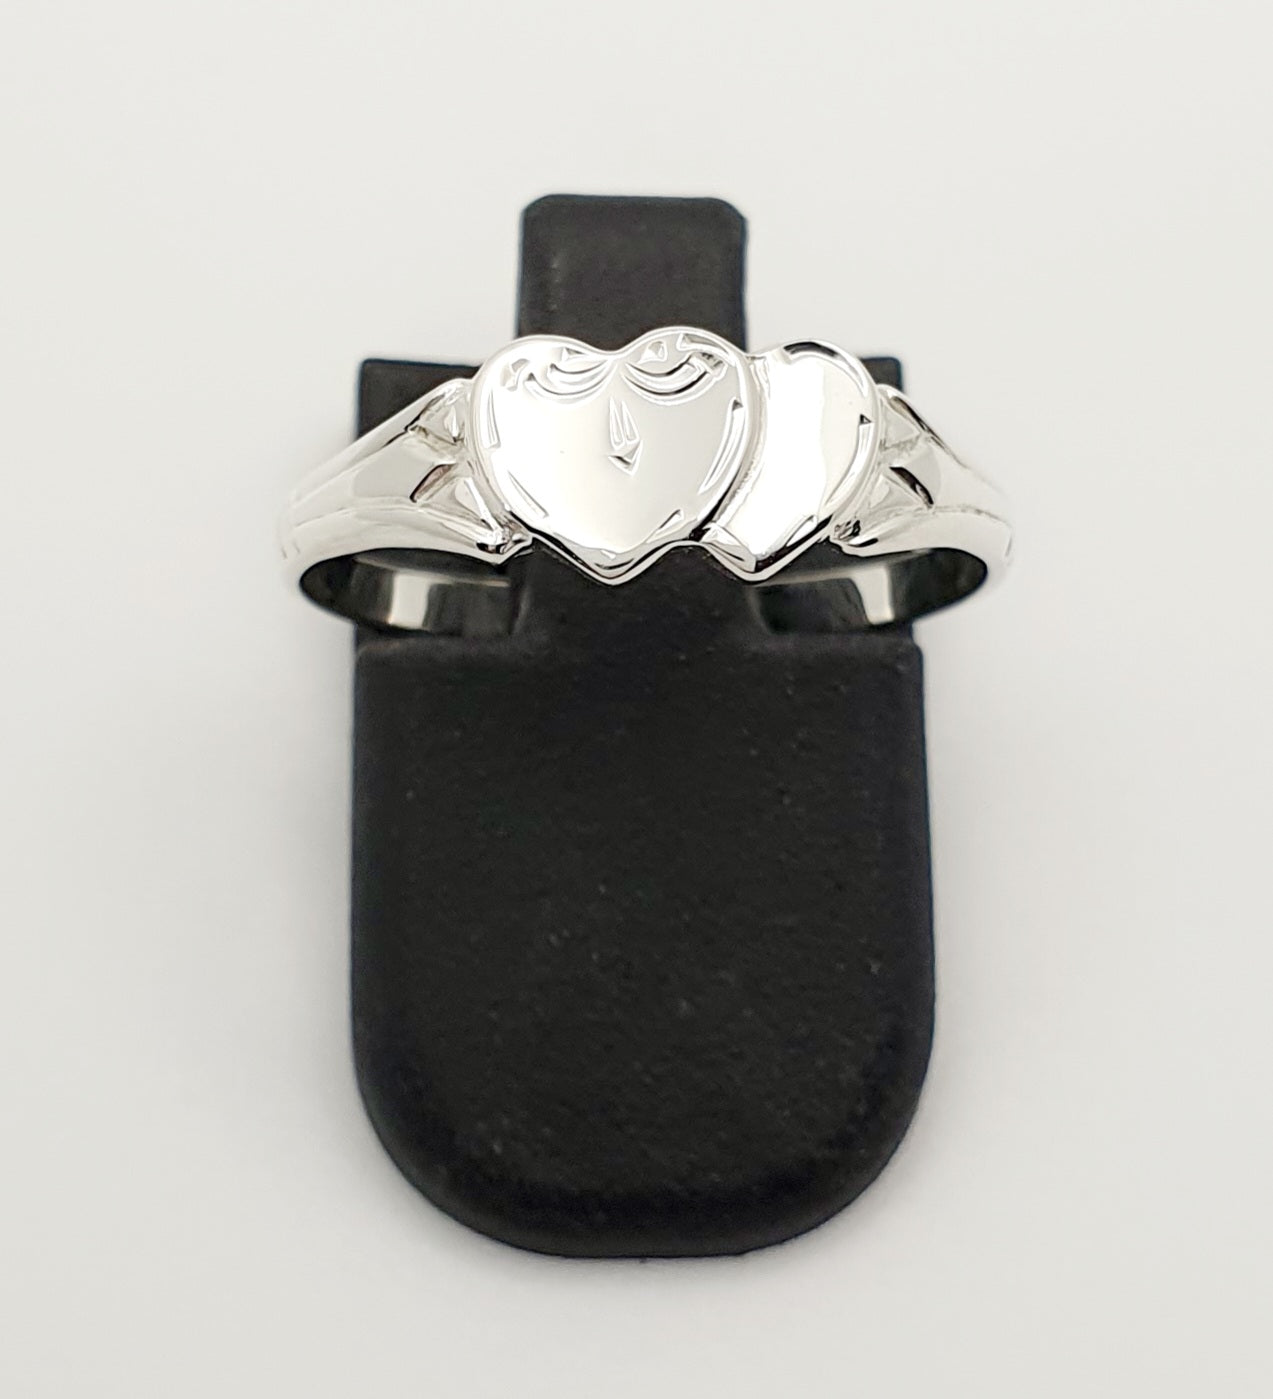 S/S Double Heart Signet Ring. Size M 1/2